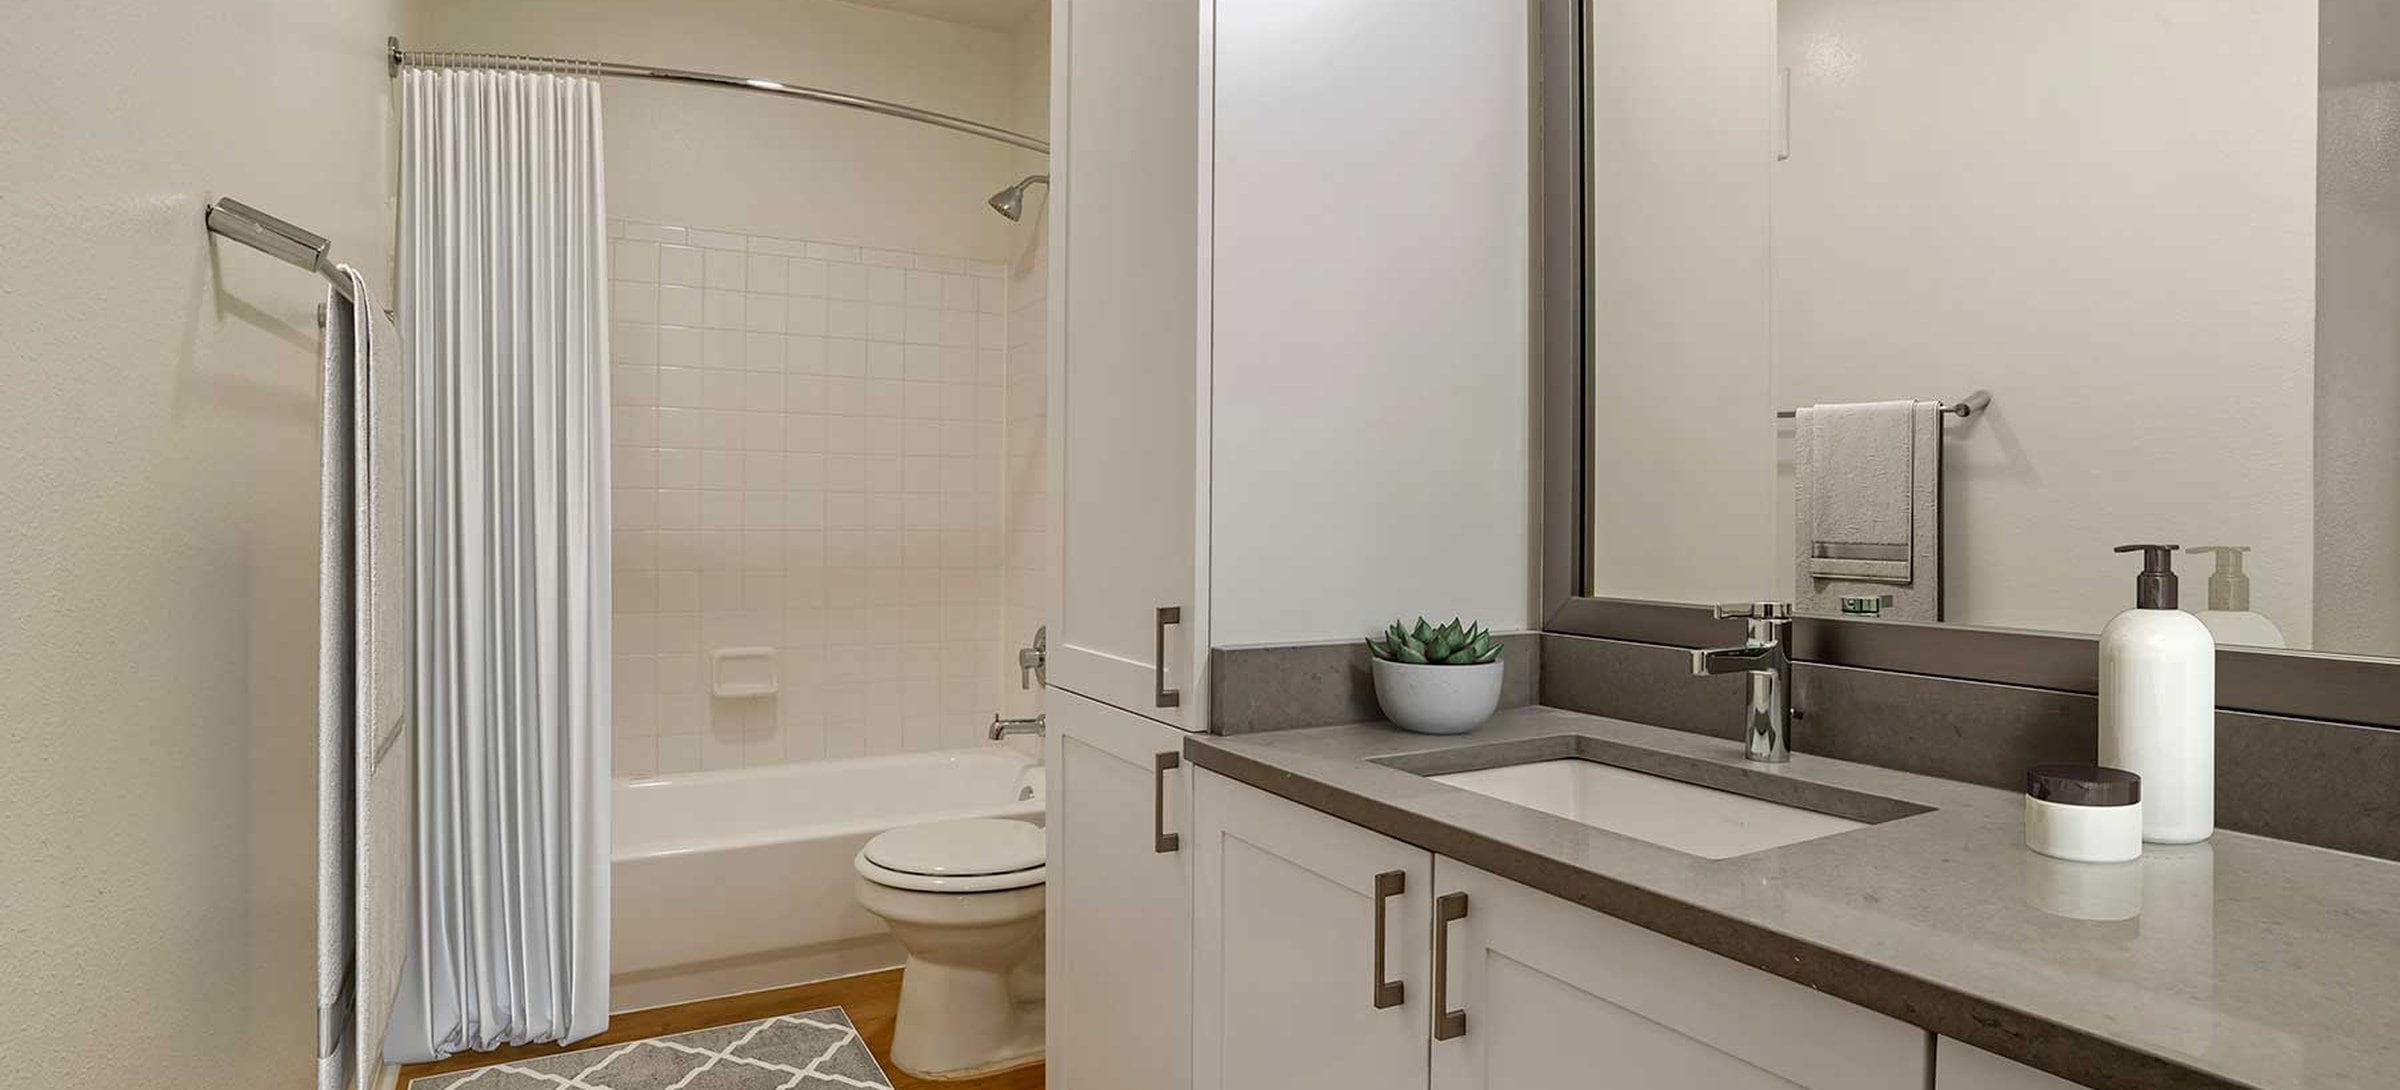 Newly renovated Finish Package V baths with white cabinetry, grey quartz countertops, and hard surface flooring